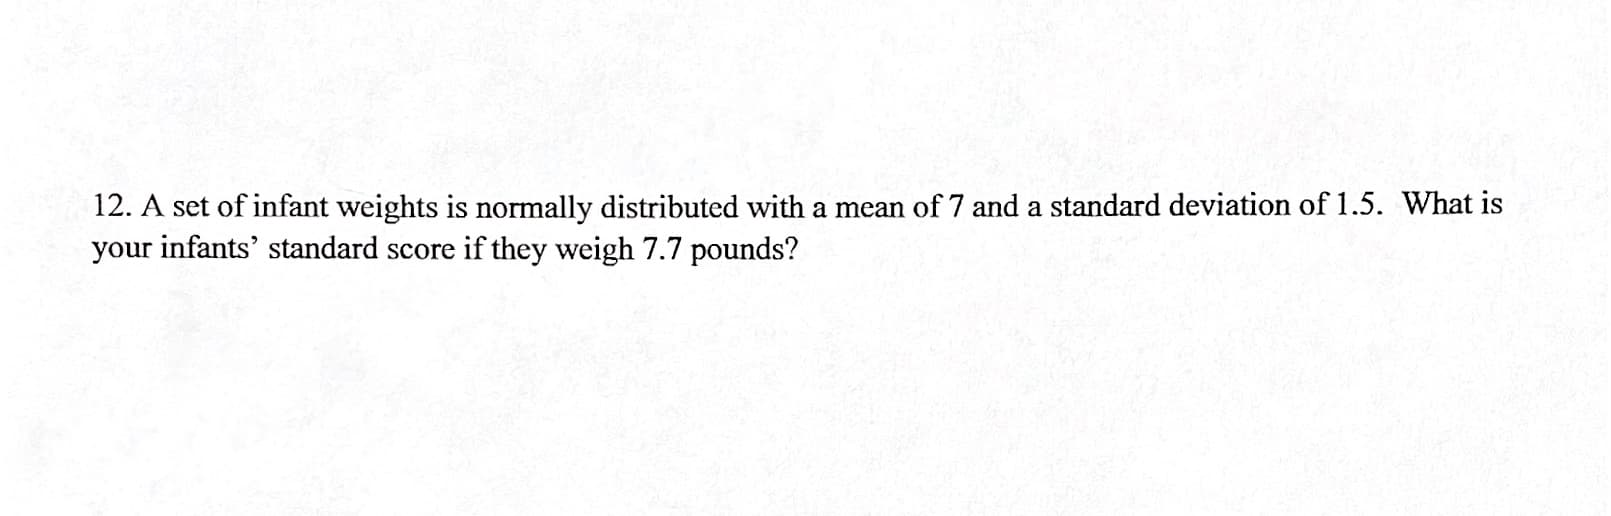 12. A set of infant weights is normally distributed with a mean of 7 and a standard deviation of 1.5. What is
your infants' standard score if they weigh 7.7 pounds?
